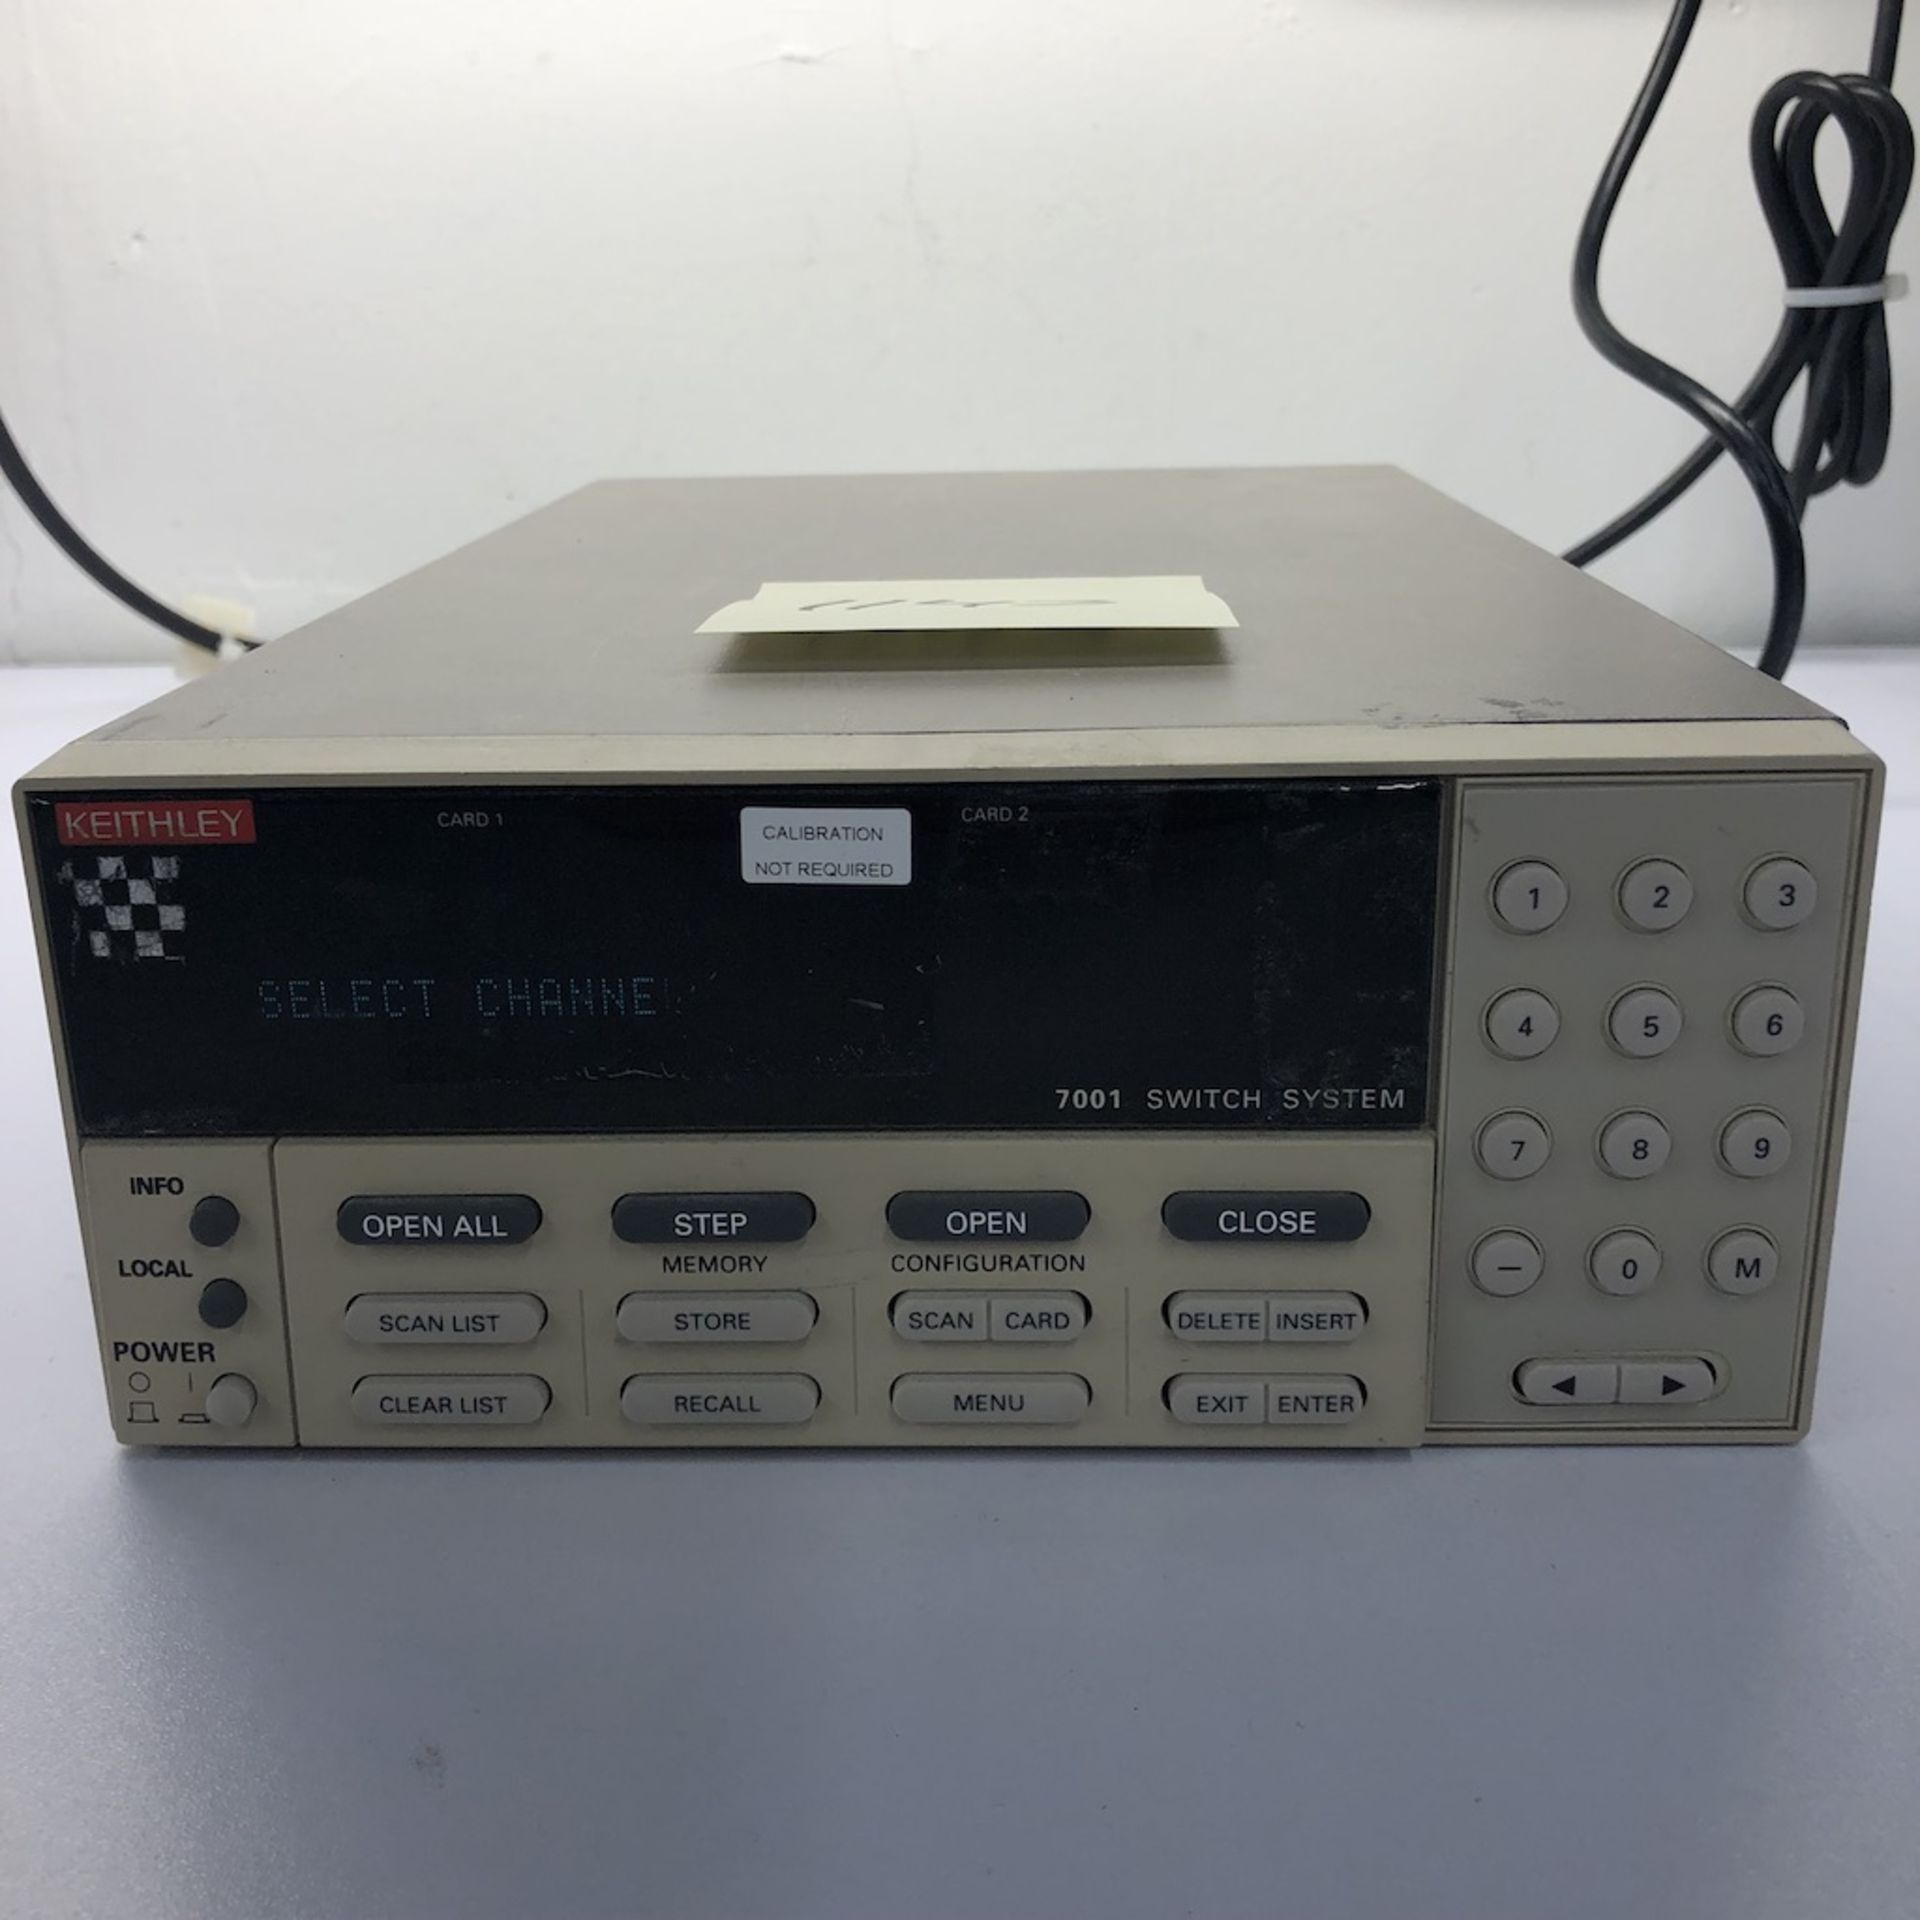 KEITHLEY 7001 SWITCH SYSTEM